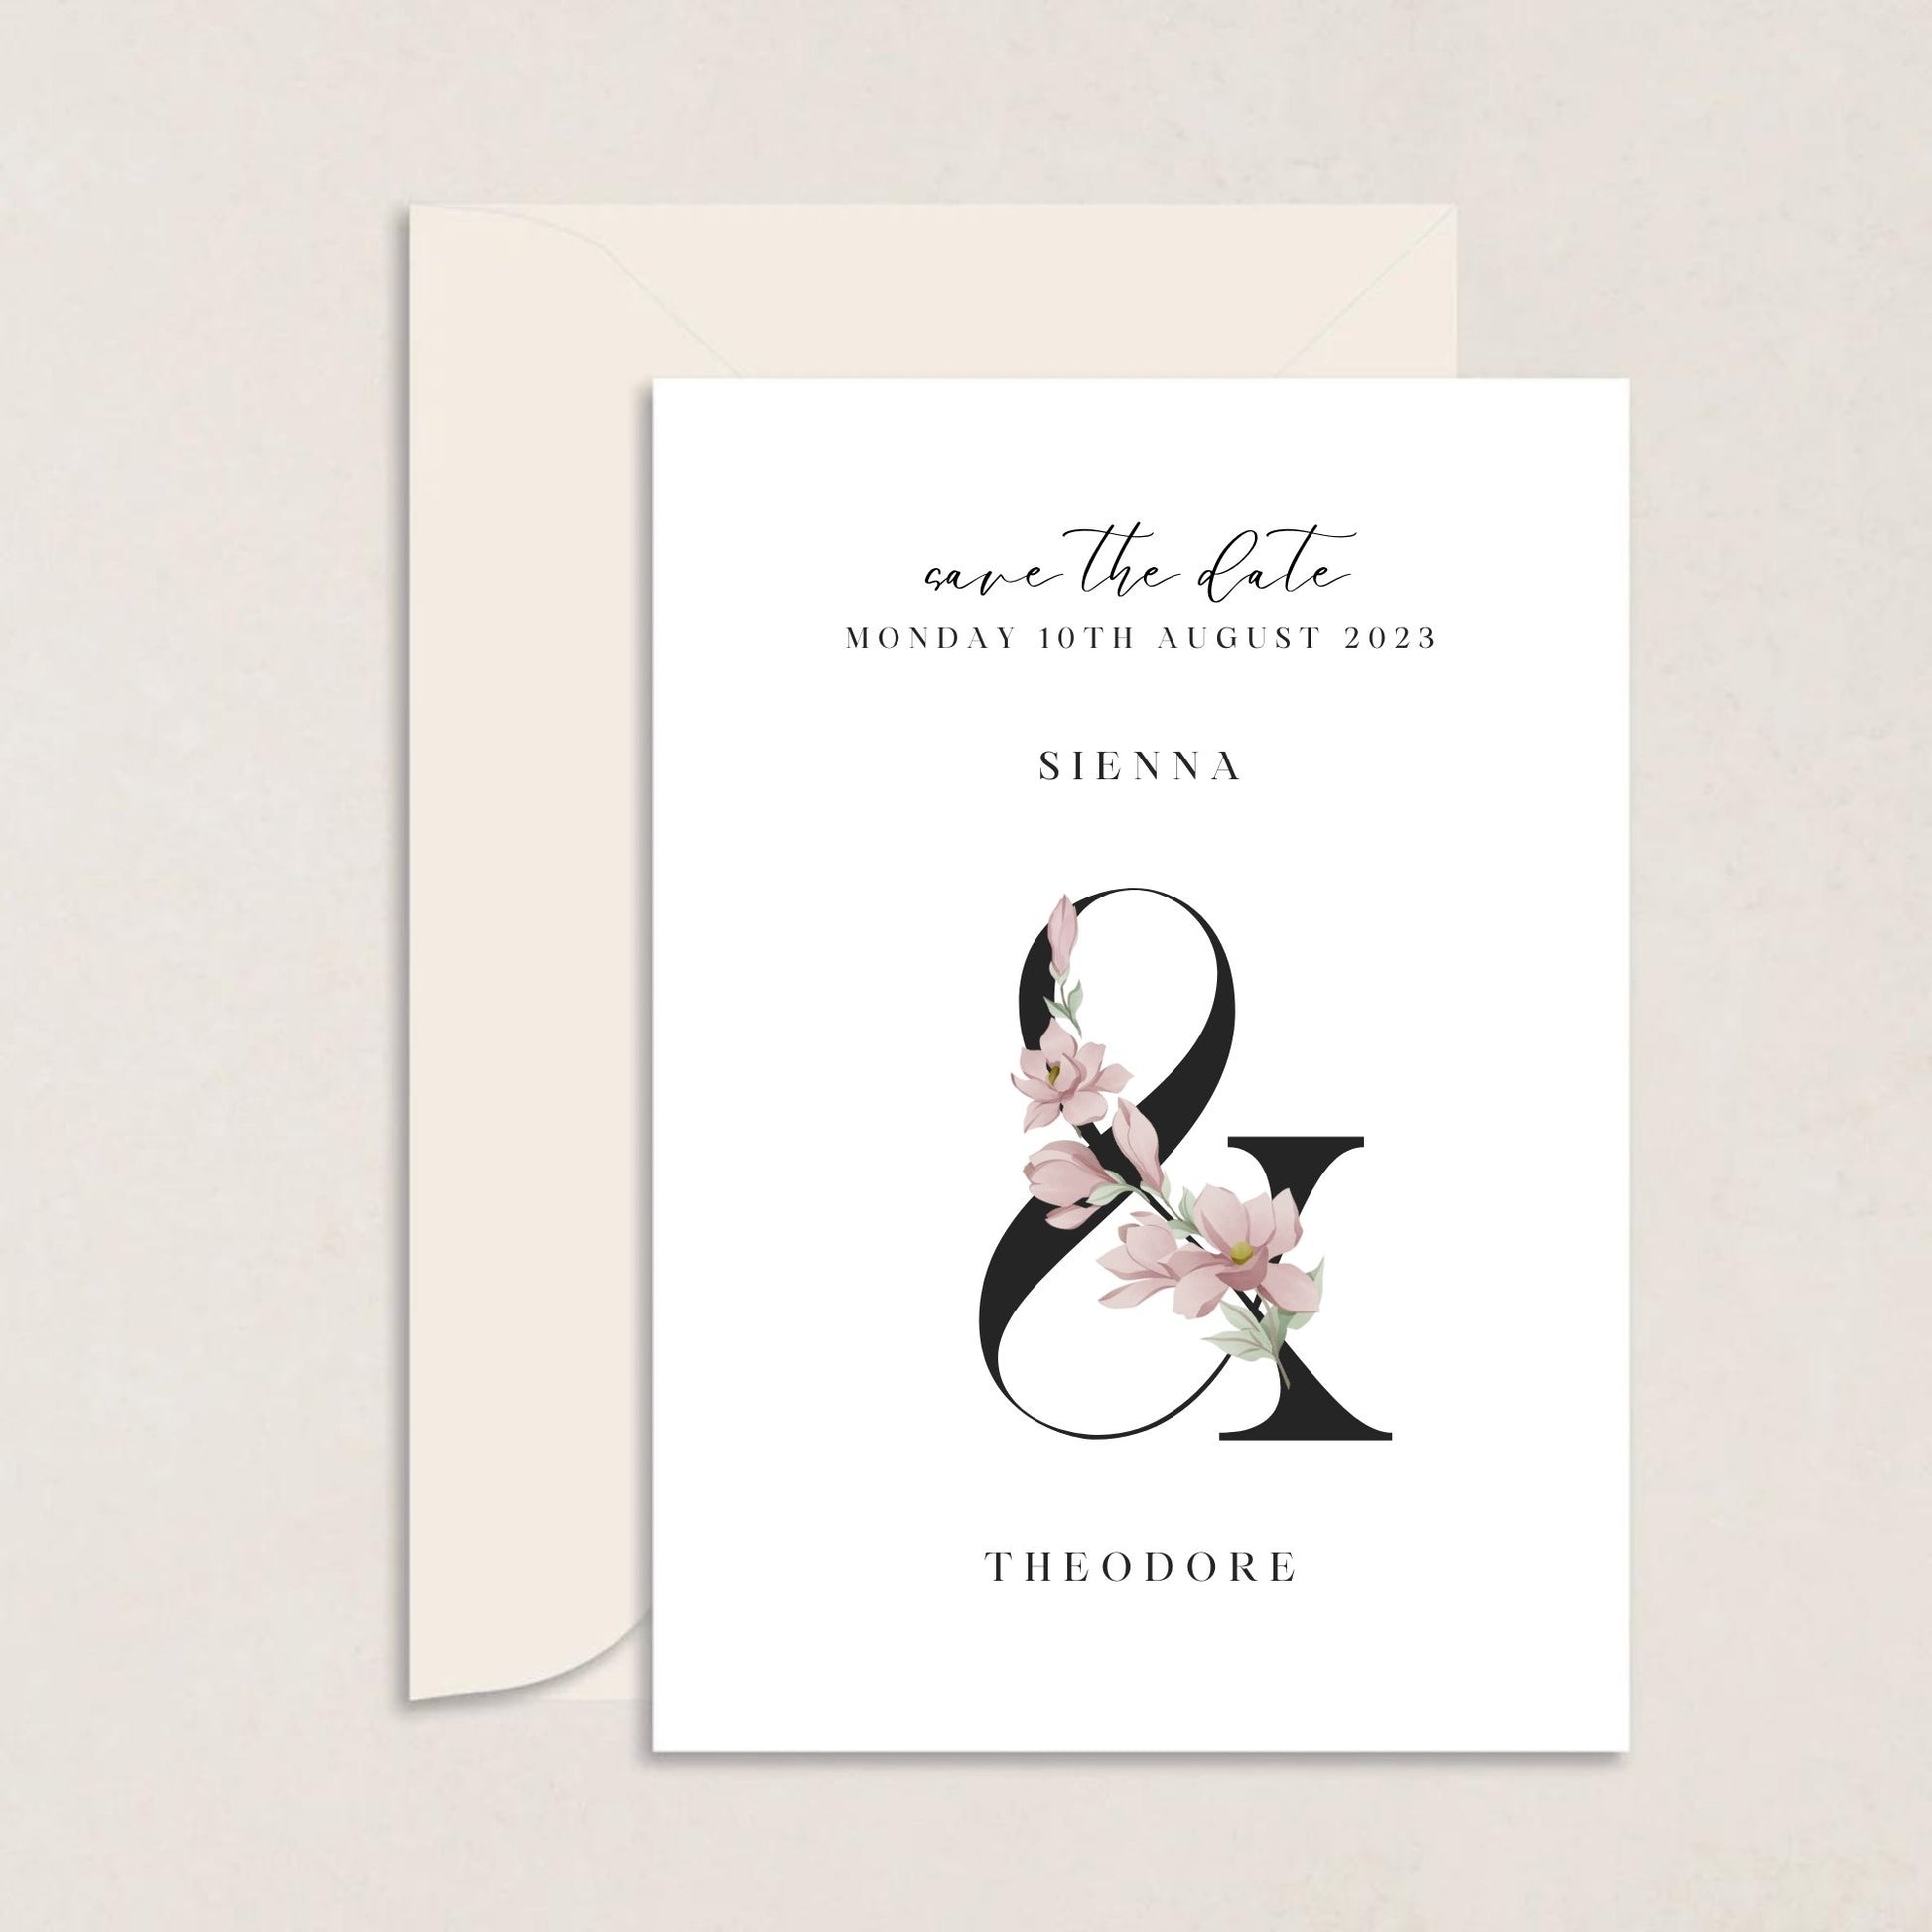 SIENNA Wedding Save the Date - Wedding Invitations available at The Ivy Collection | Luxury Wedding Stationery